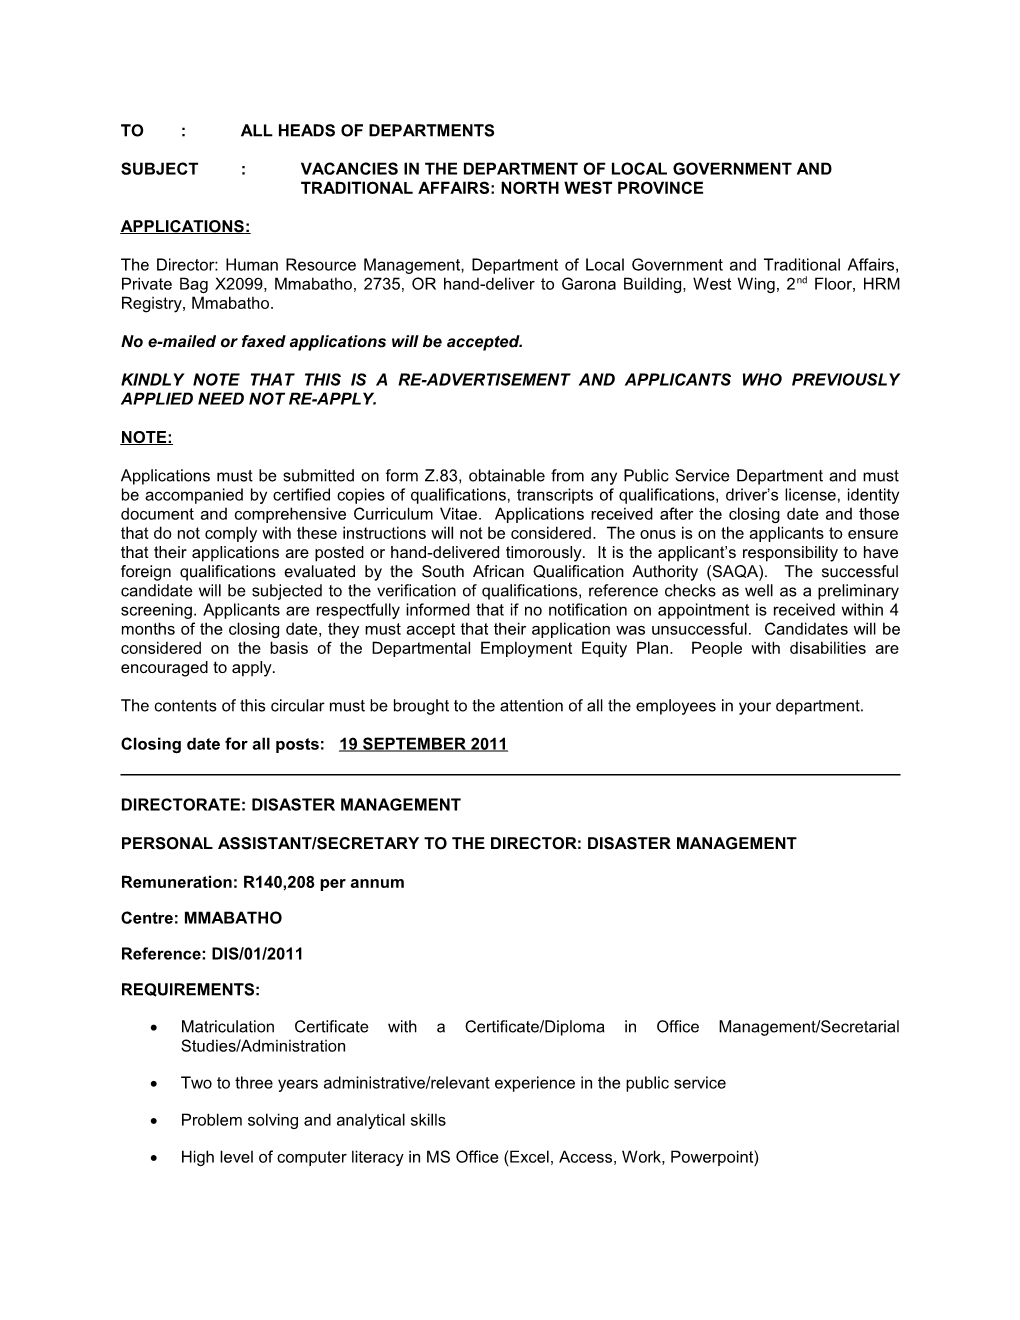 Subject : Vacancies in the Department of Local Government And